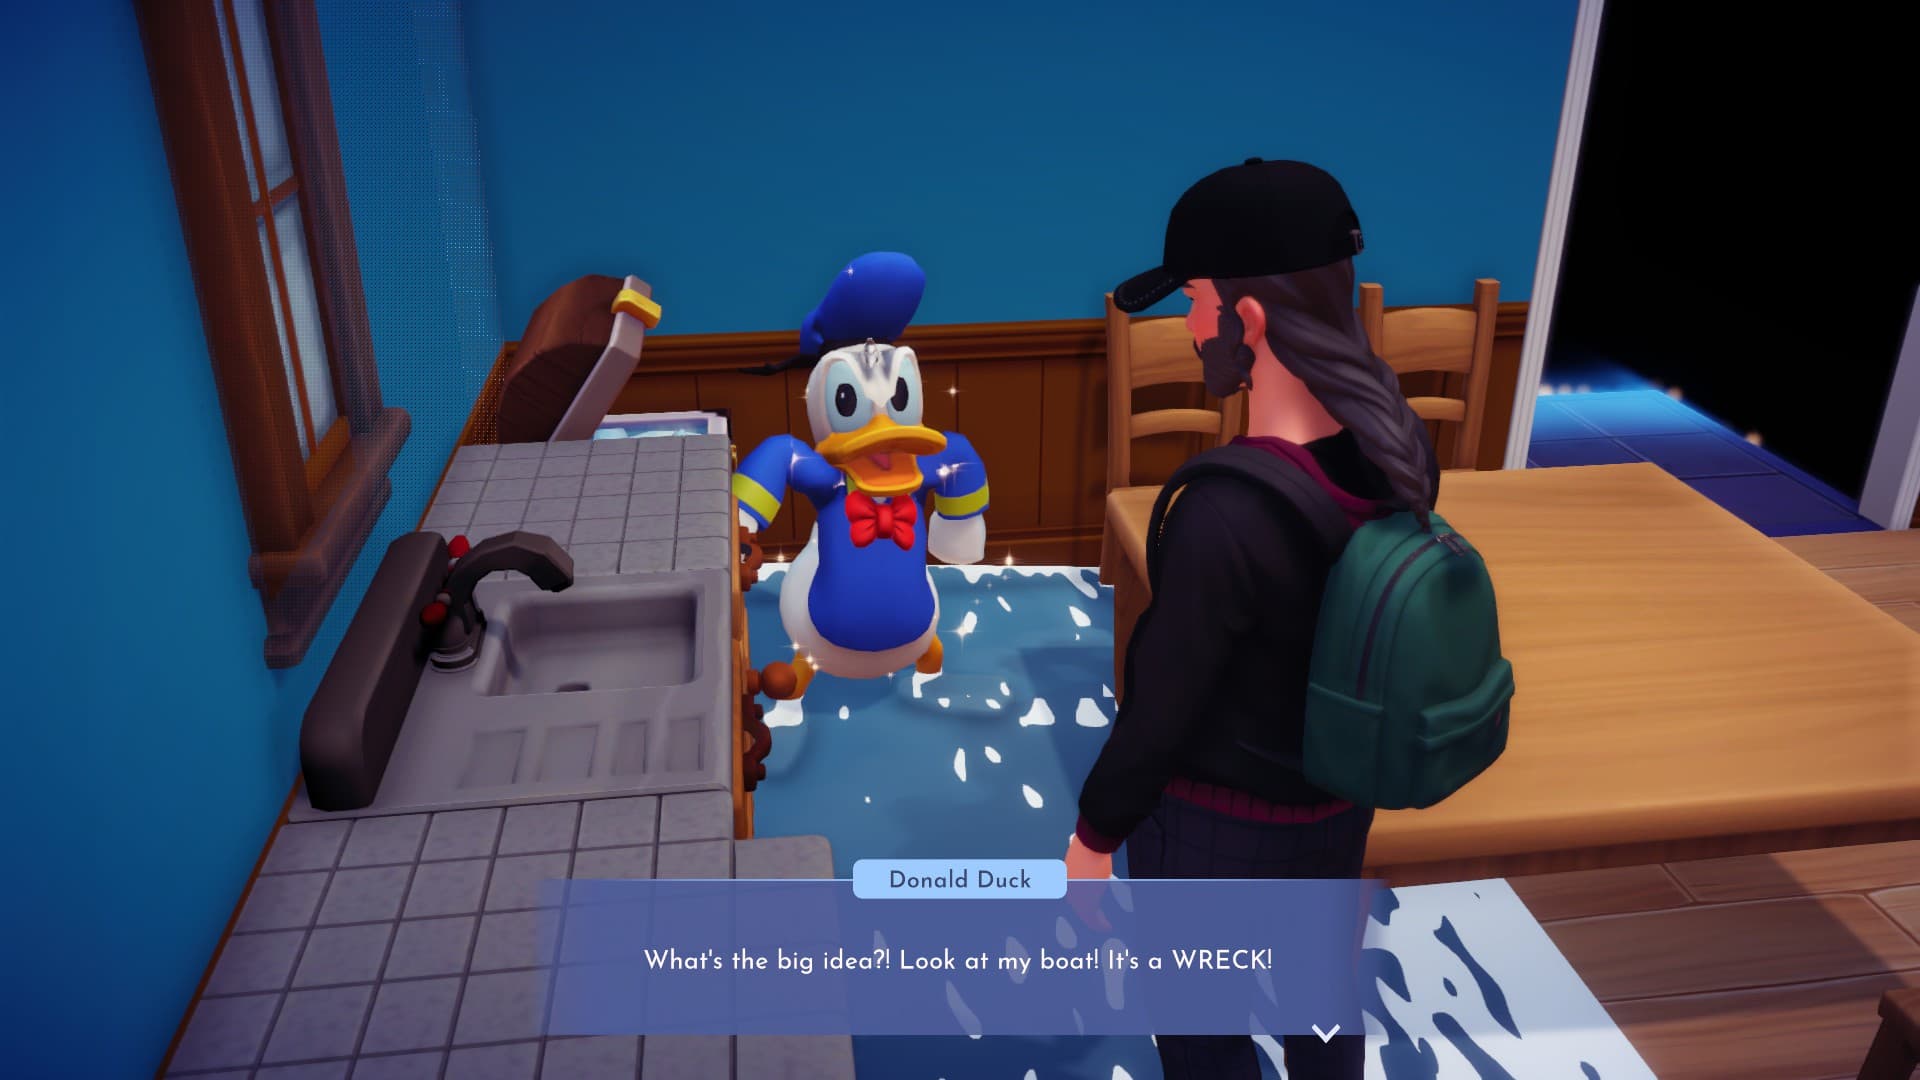 Donald Duck angrily yelling about his home being in shambles, Disney Dreamlight Valley Donald Duck Guide 